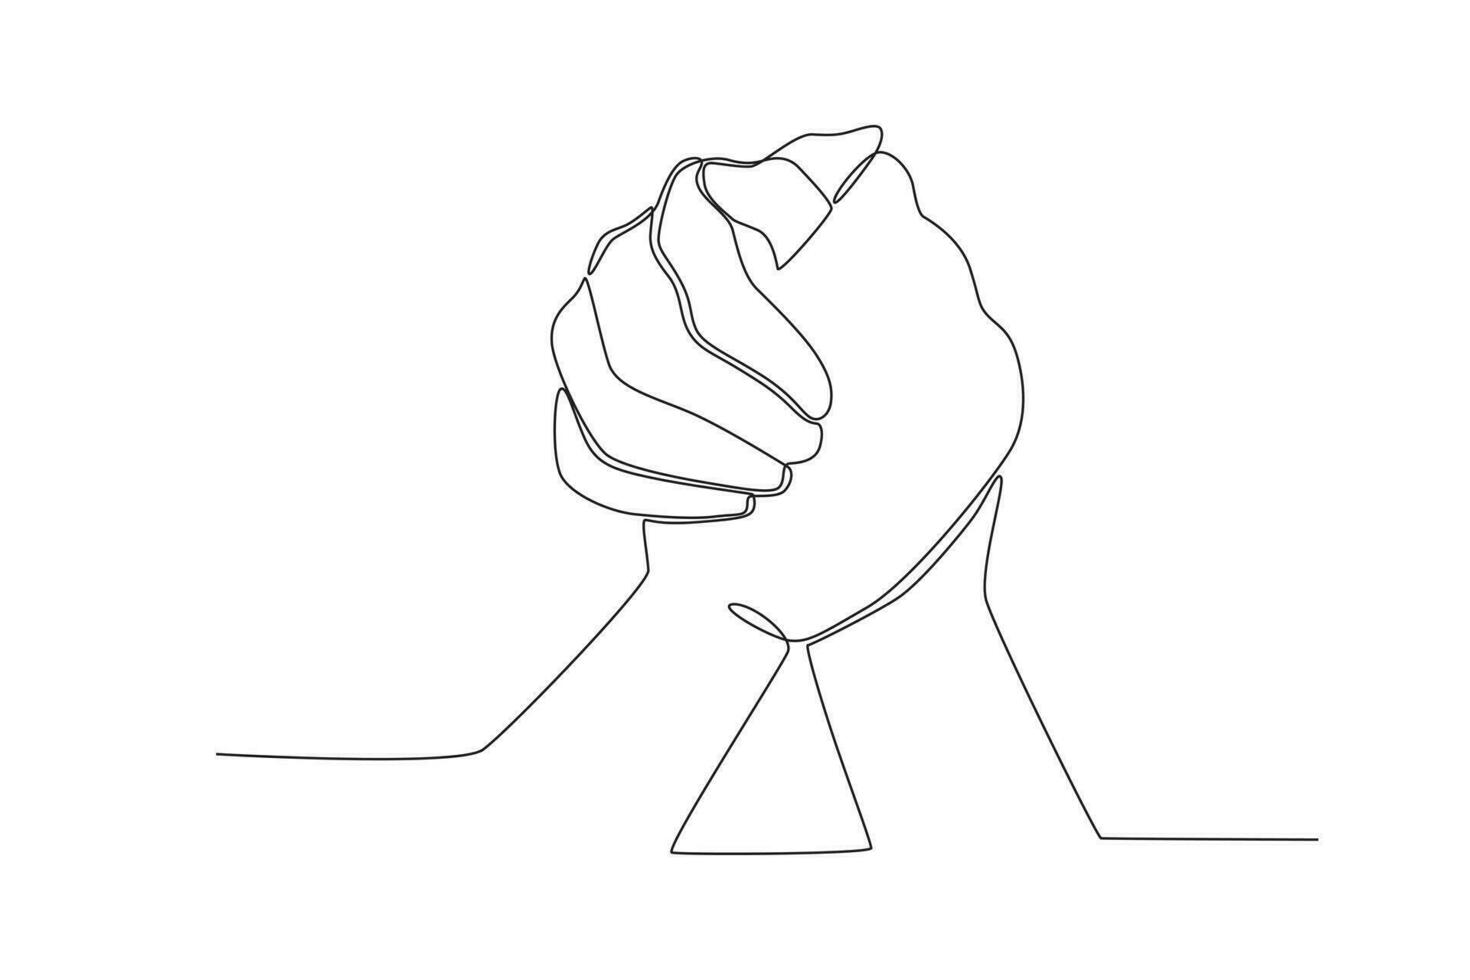 Hands clasped together vector